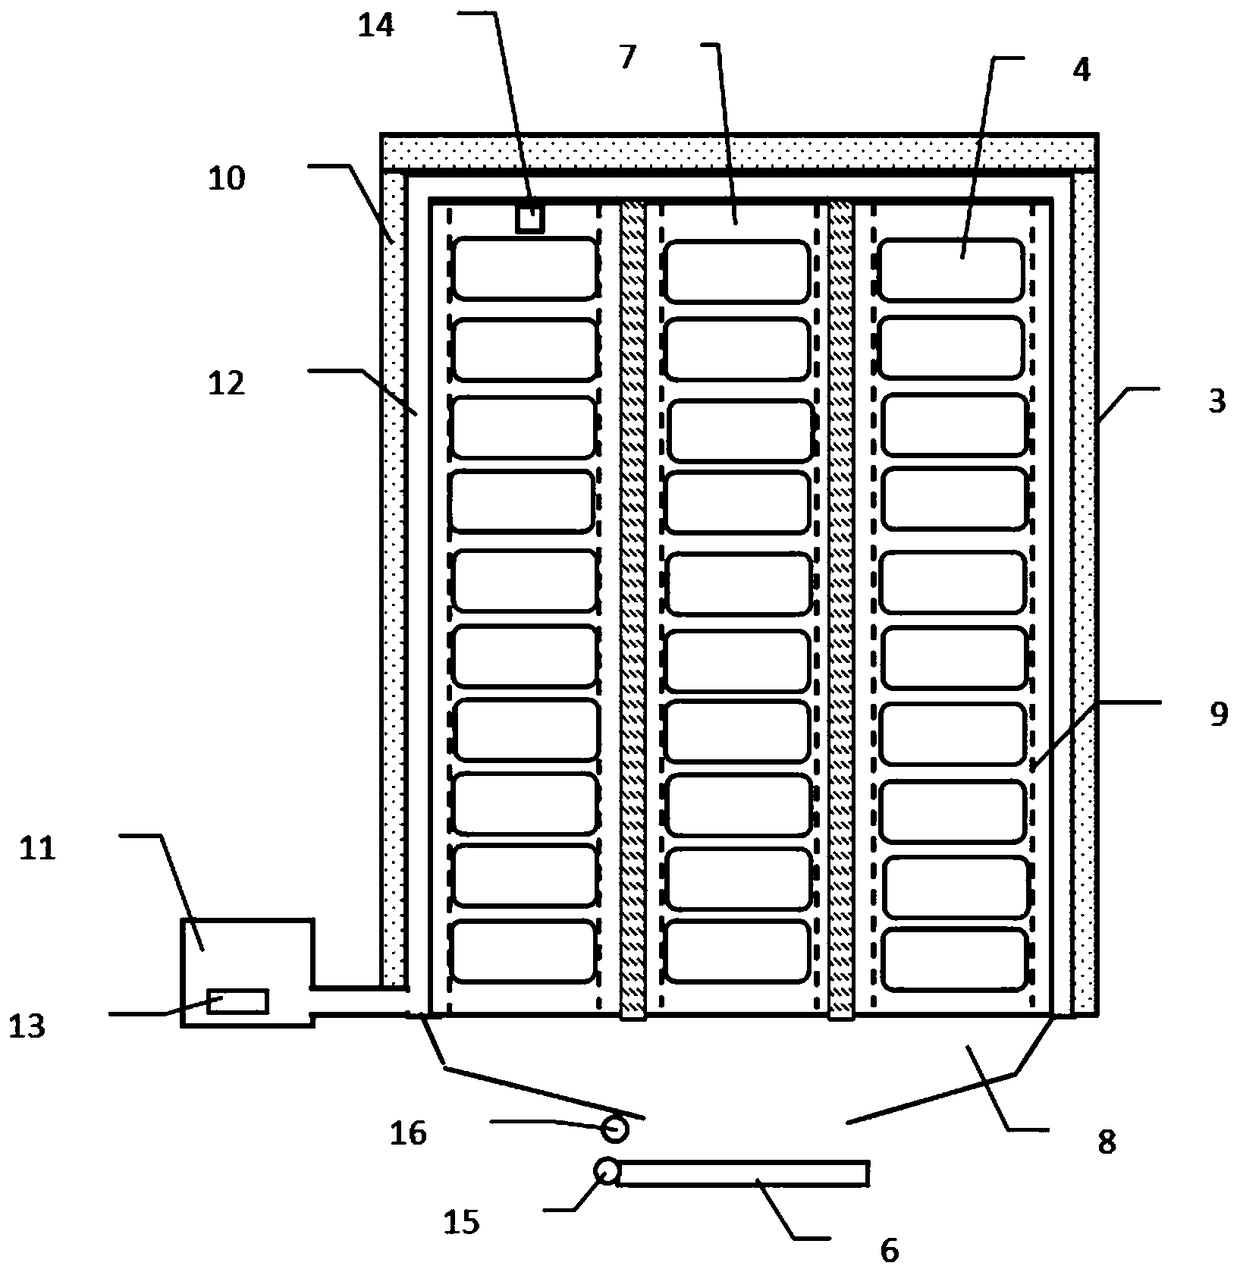 Reservation and vending system and method of use of unattended self-service fast food